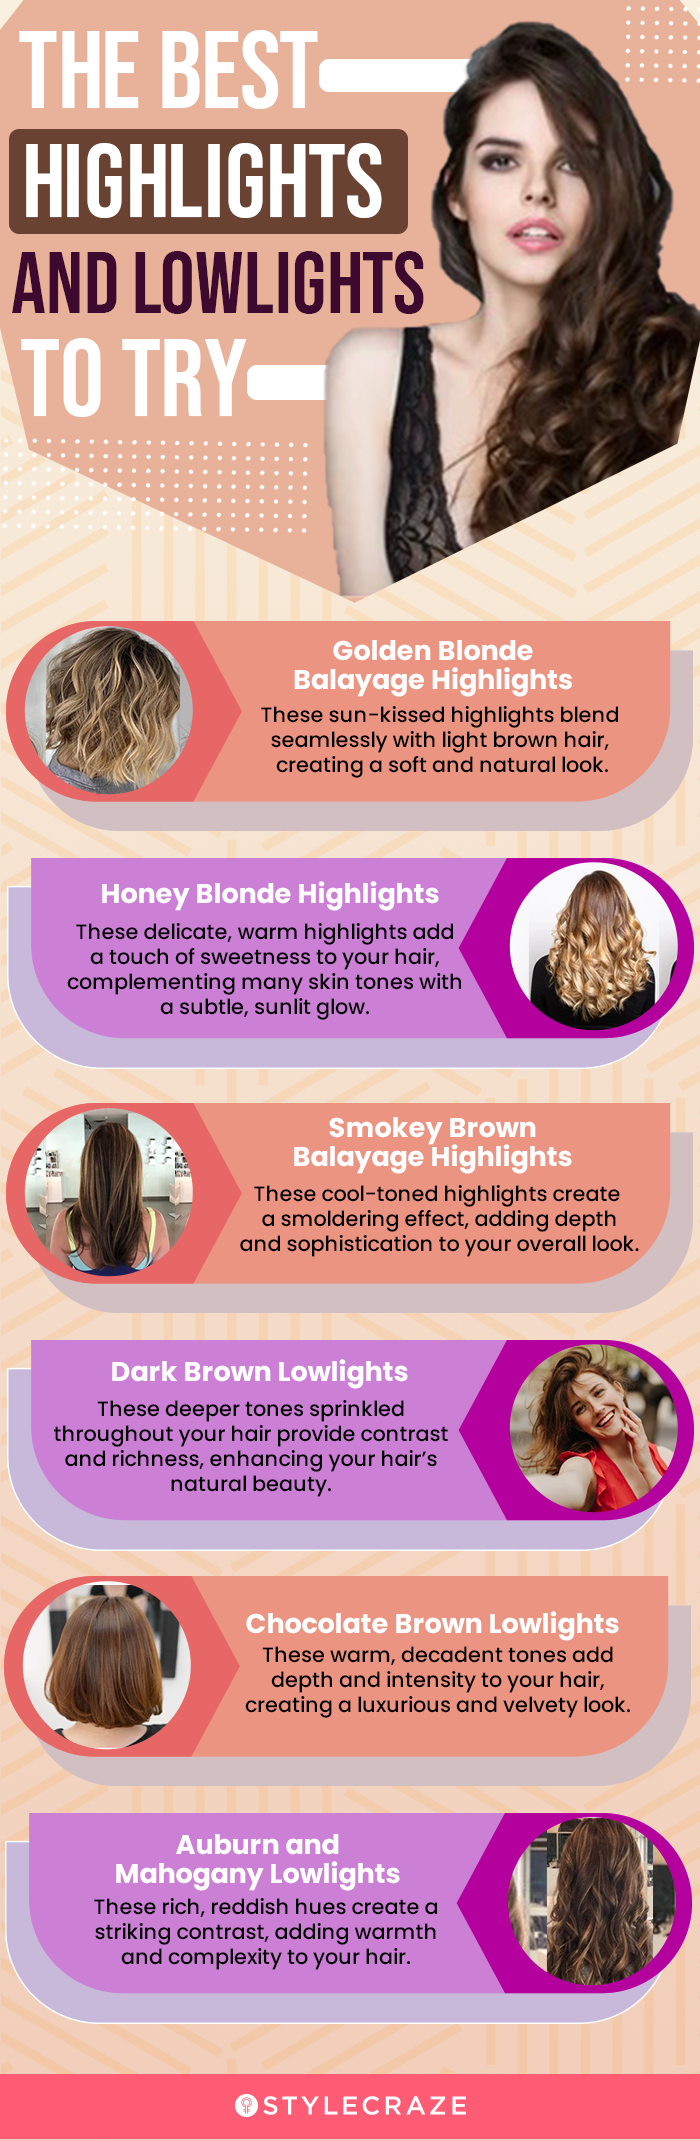 the best highlights and lowlights to try(infographic)